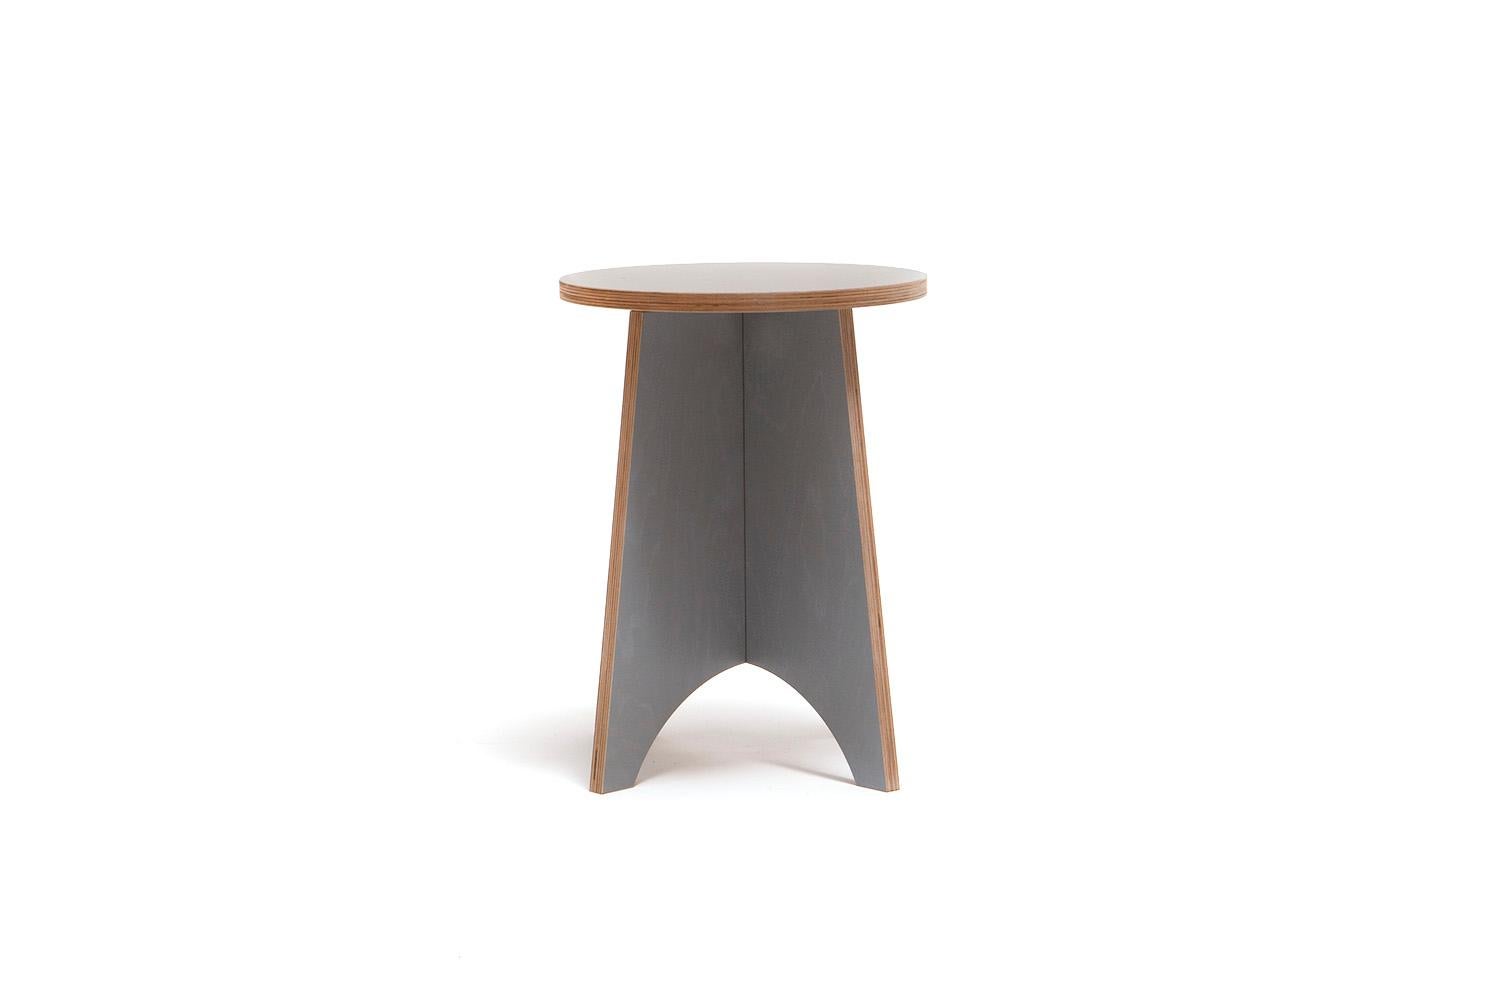 Modern Zero-Waste Plywood Upstate New York-Made Side Table or Stool For Sale